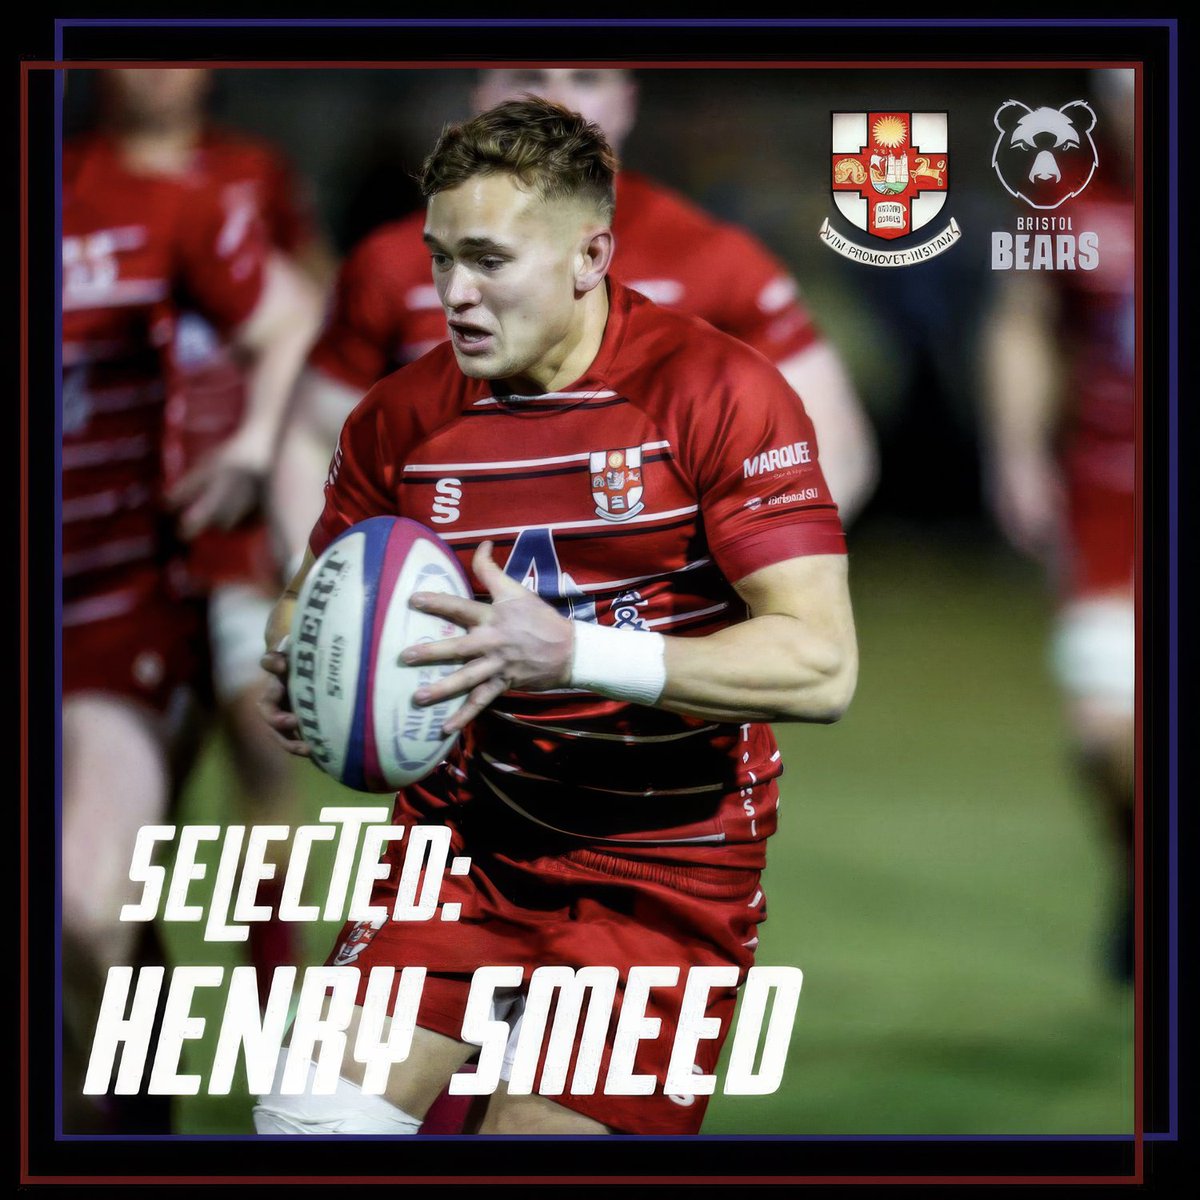 Good luck to OA Henry Smeed, who is playing for the Bristol Bears U23 squad this Friday against a #Bristol combined XV! #KingsCollegeSport